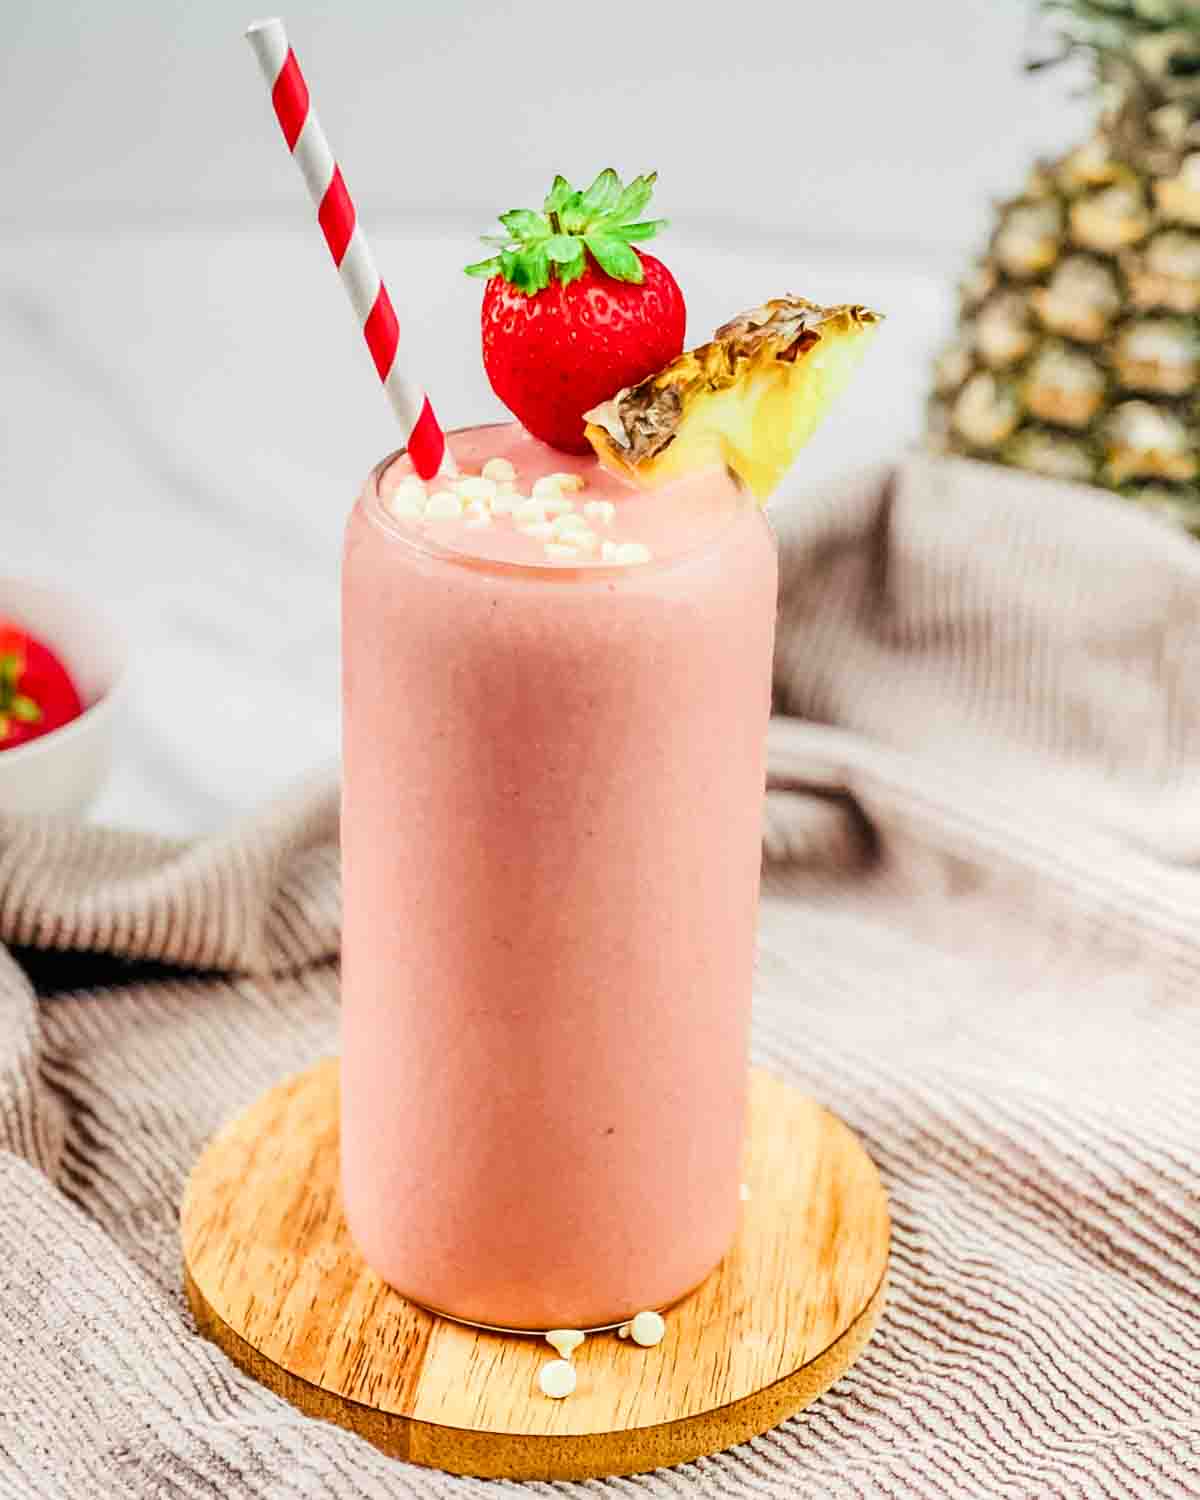 A tall glass of Tropical Smoothie Bahama Mama copycat recipe, garnished with a strawberry, pineapple, and white chocolate chips.